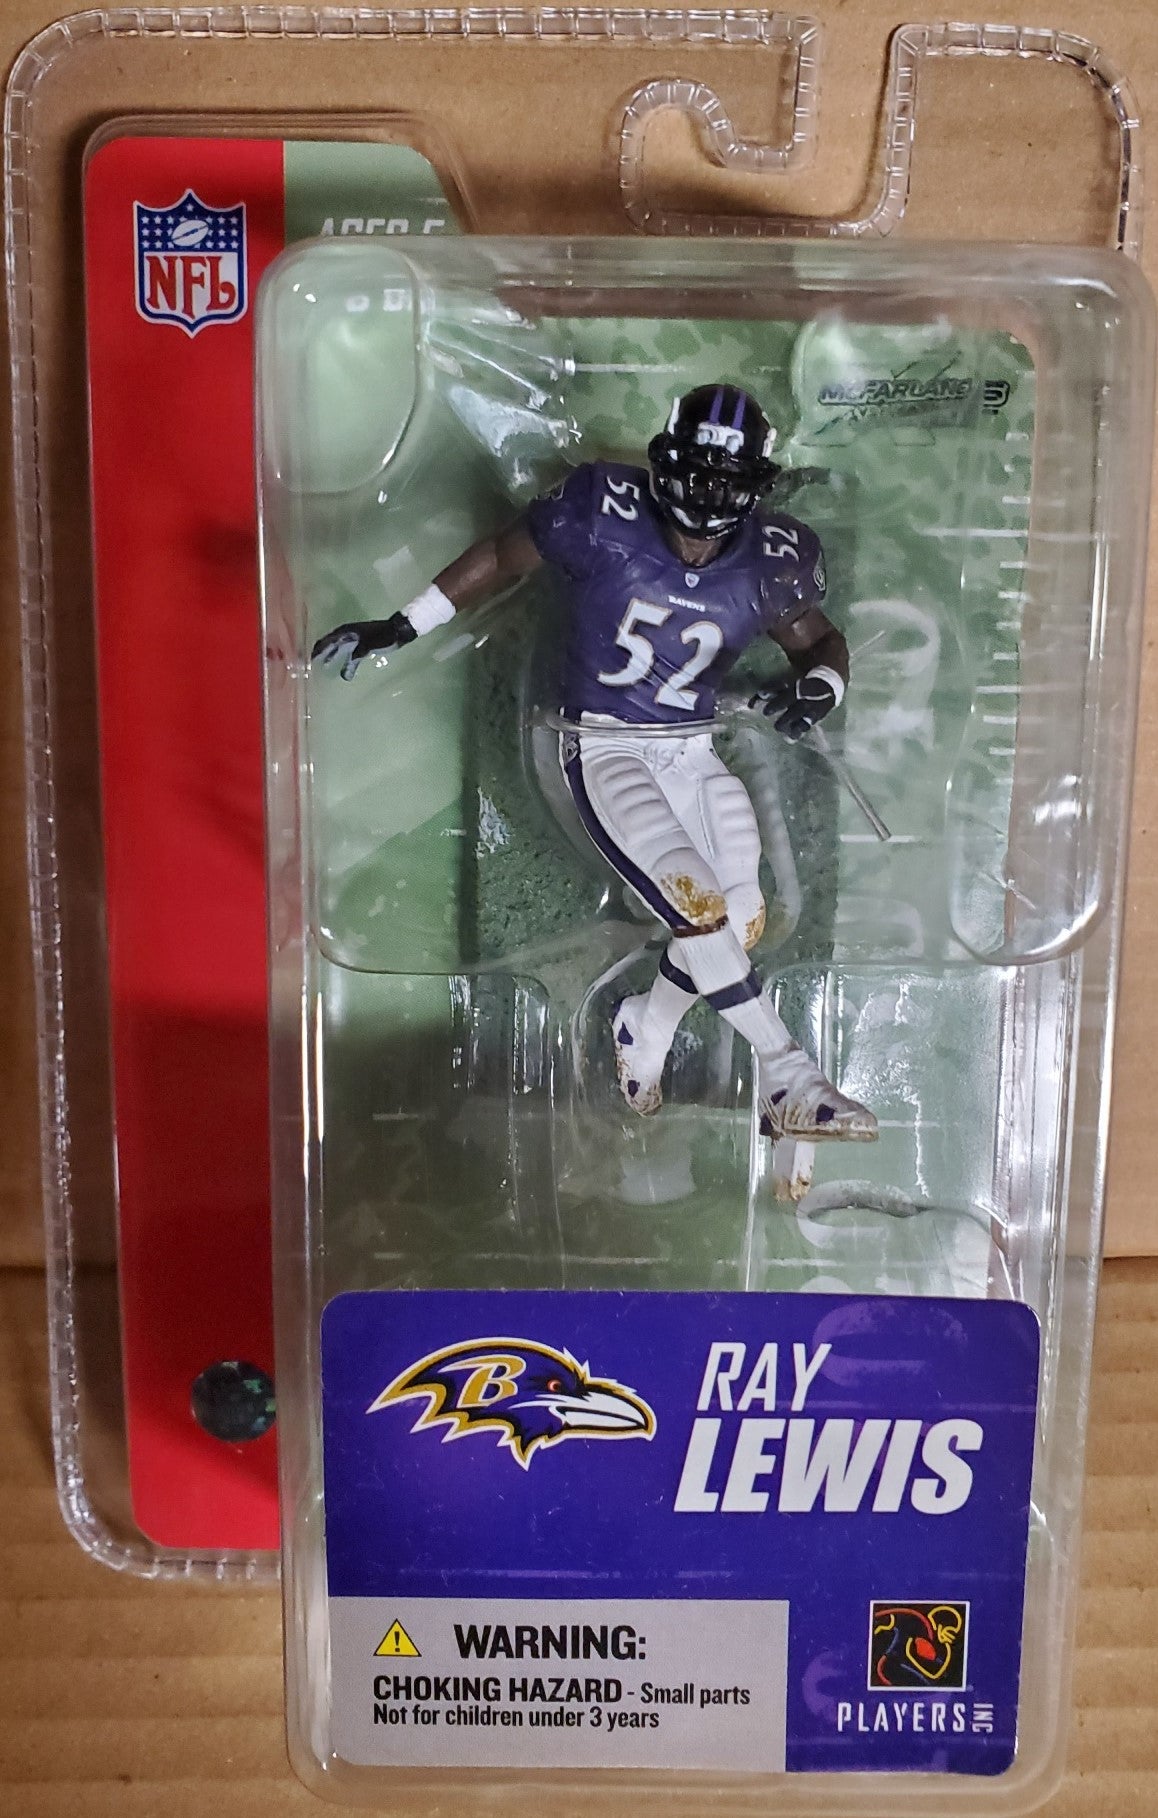 NFL 3 inch Ray Lewis action figure